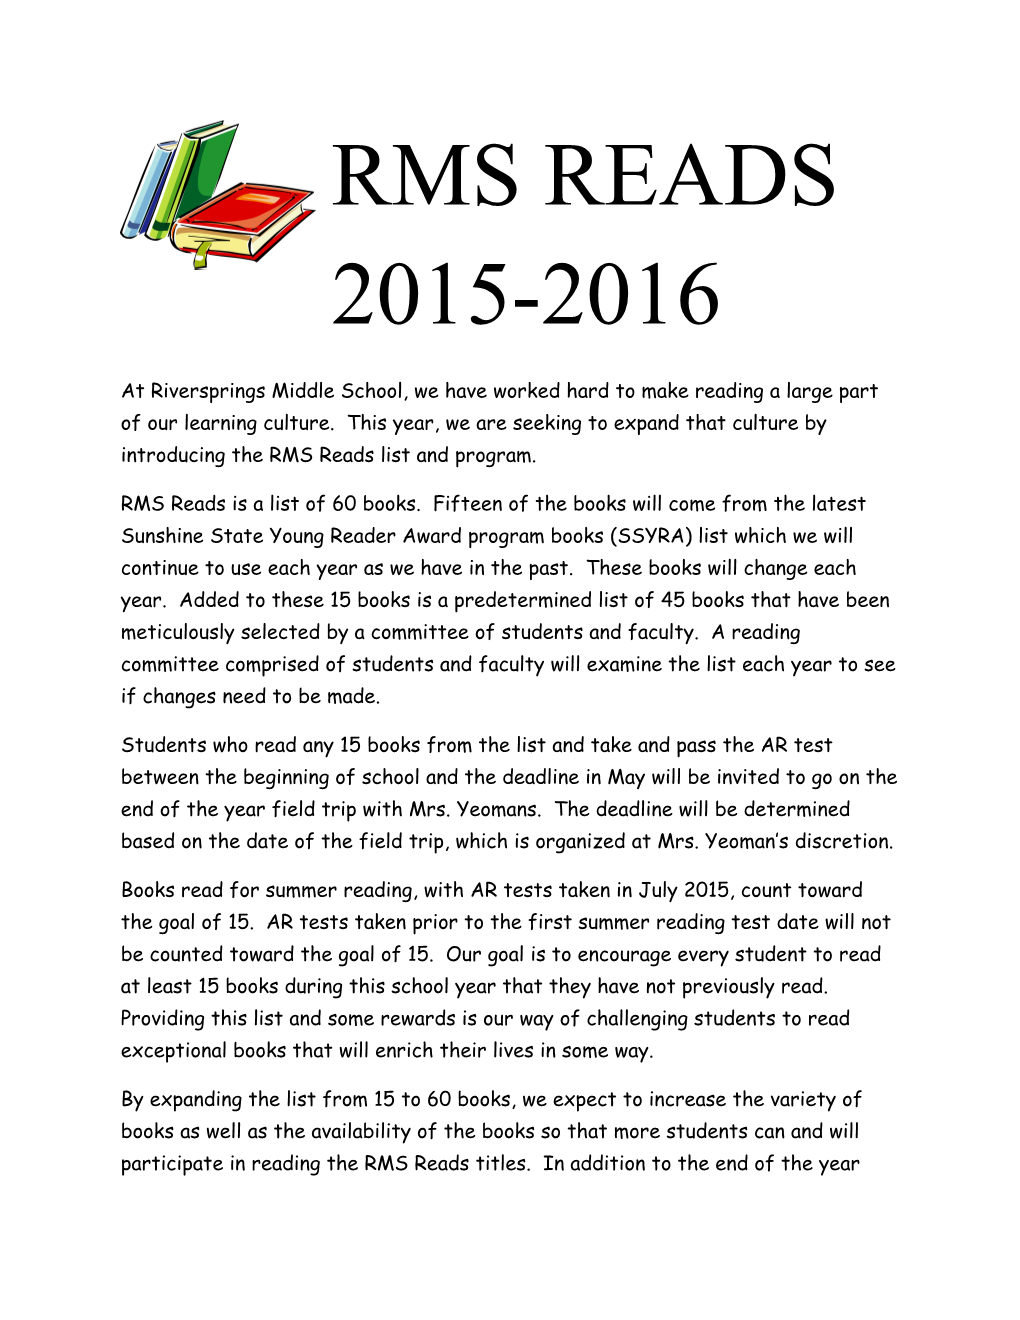 At Riversprings Middle School, We Have Worked Hard to Make Reading a Large Part of Our